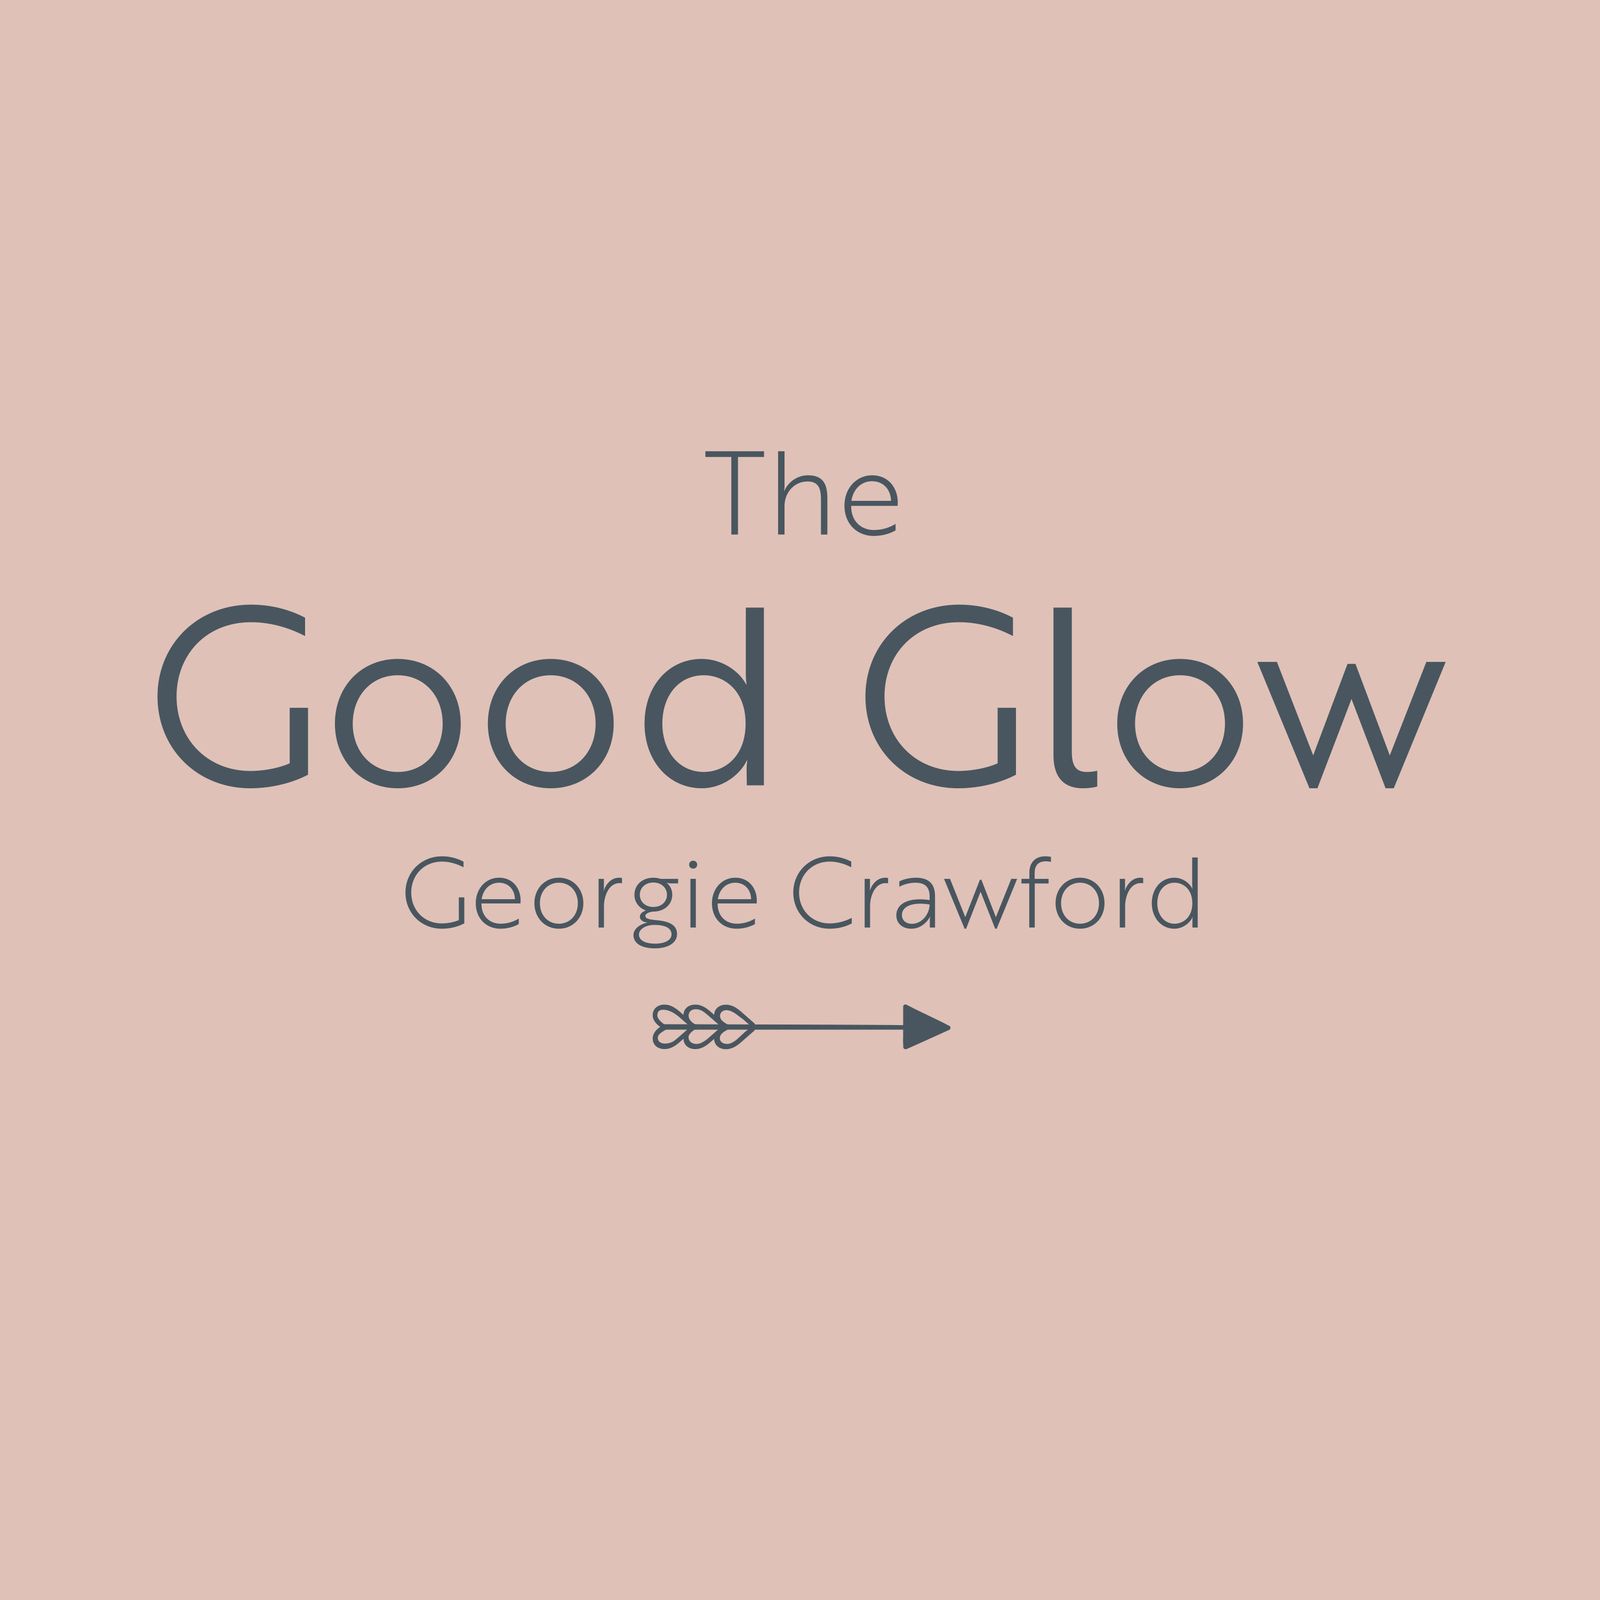 S12 Ep9: The Good Glow - It's Pippa O'Connor Ormond